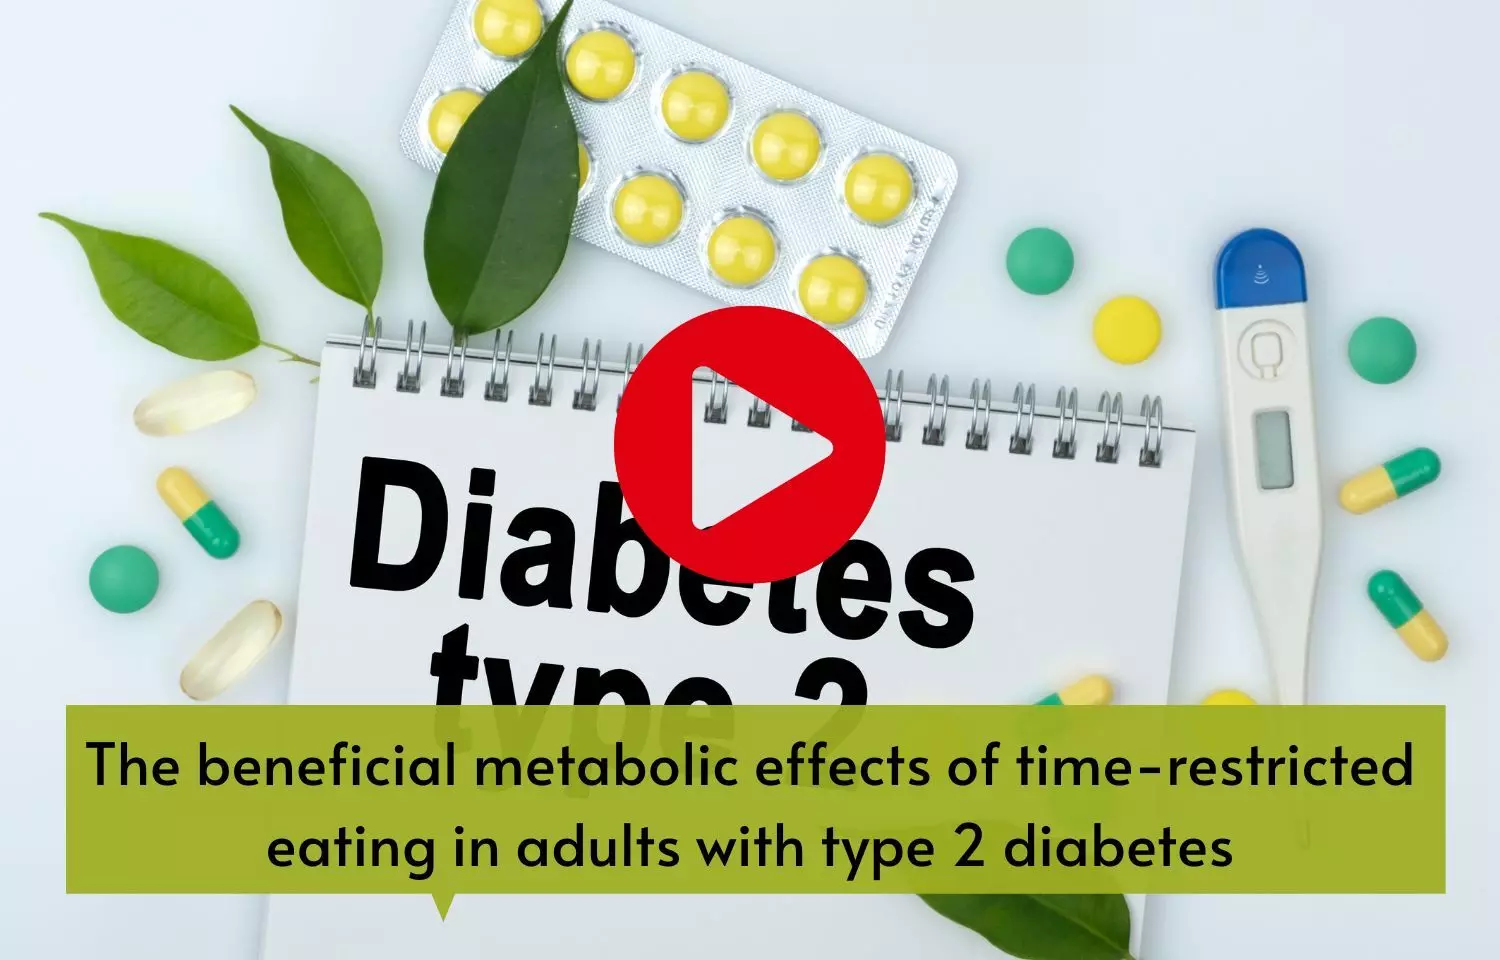 The beneficial metabolic effects of time-restricted eating in adults with type 2 diabetes